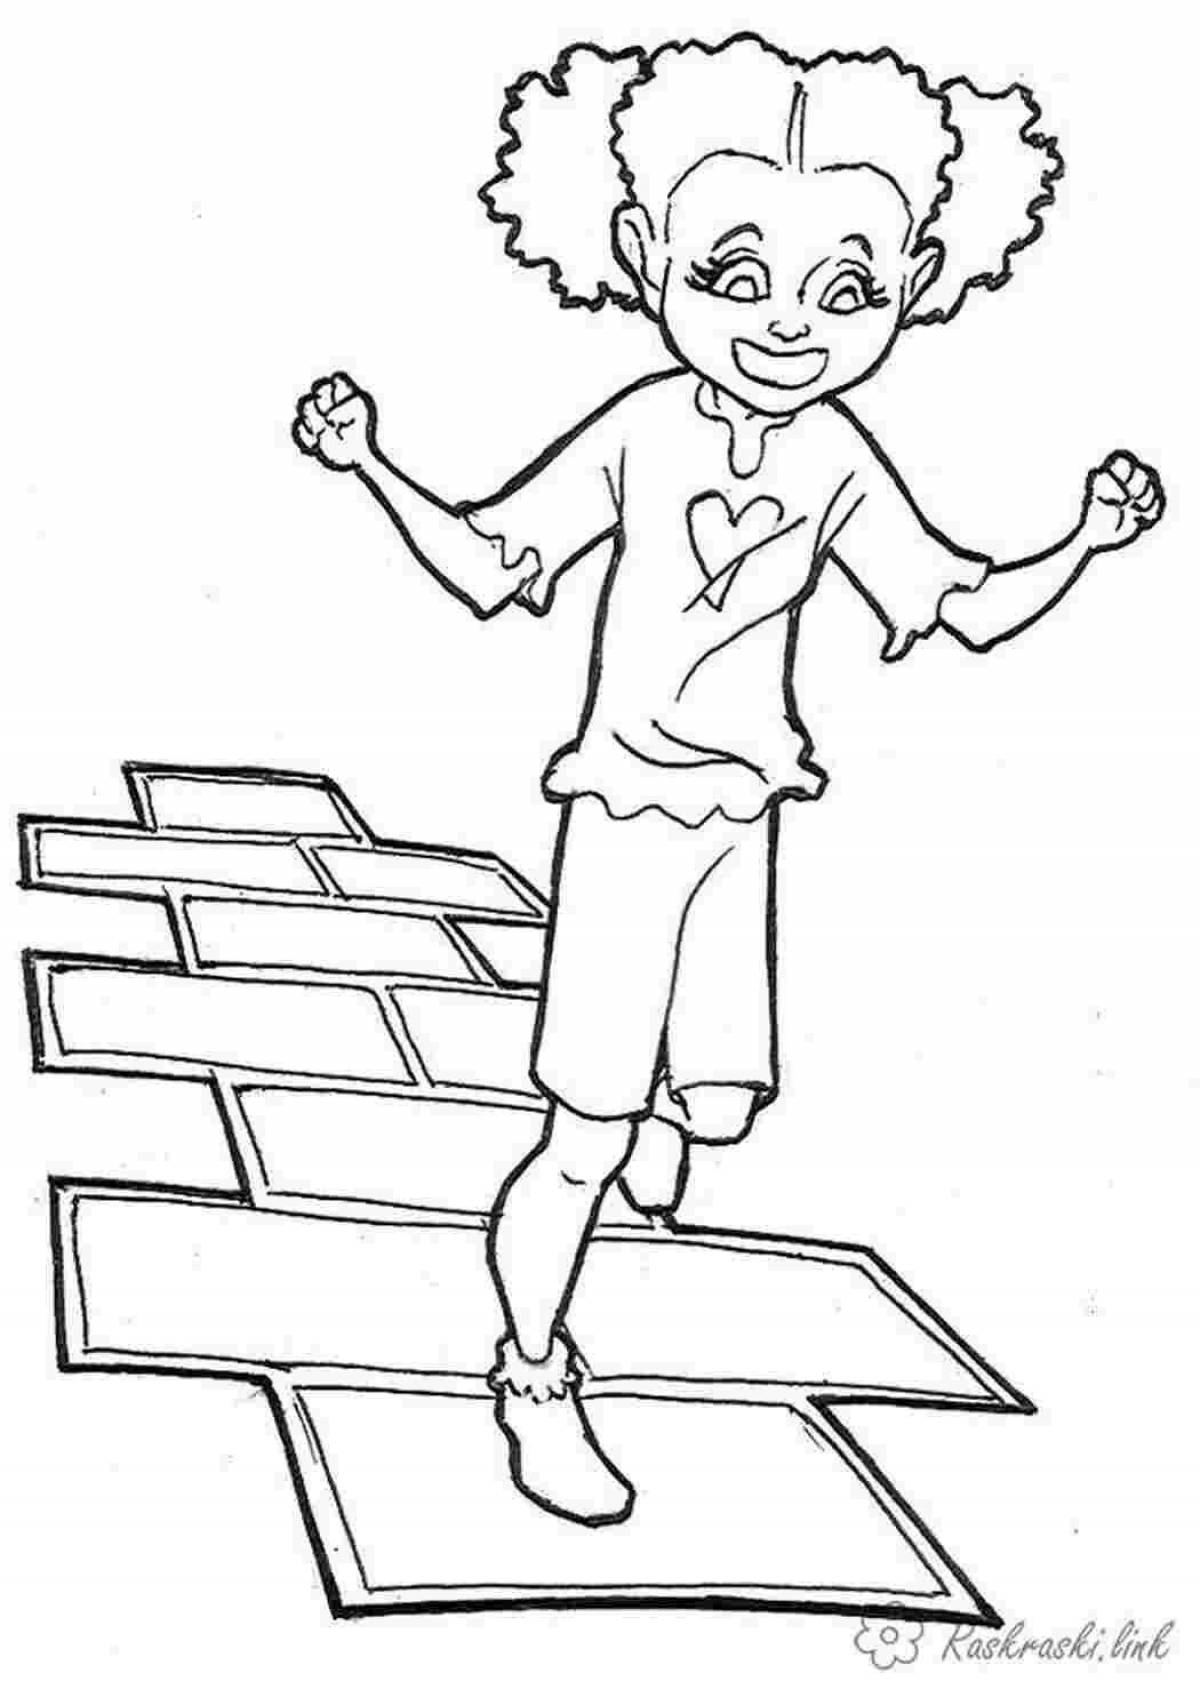 Adventure jumping coloring pages